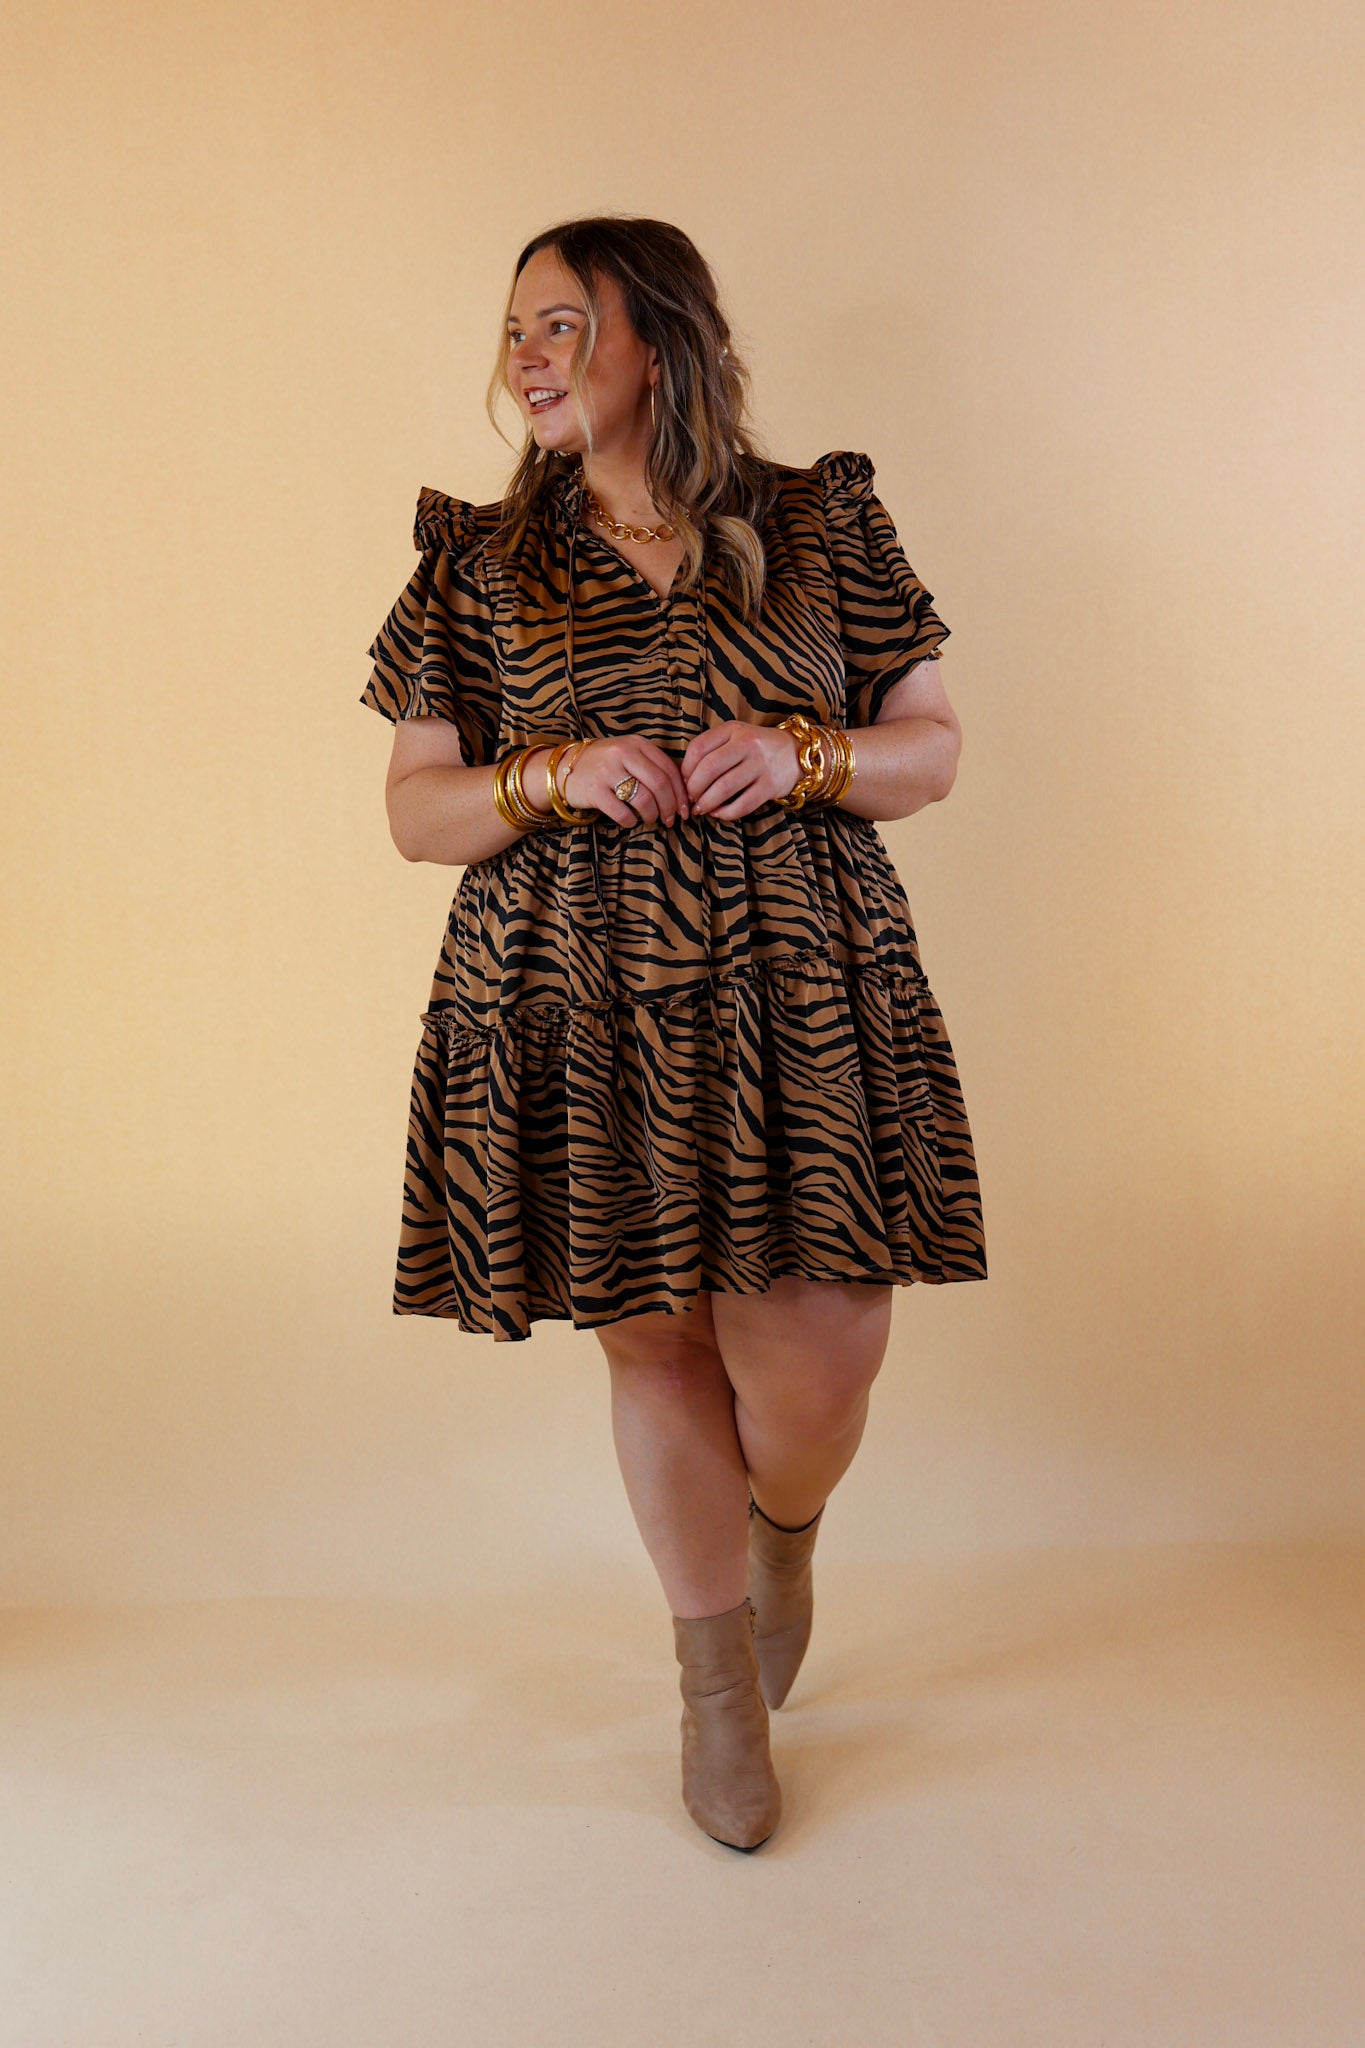 If You Dare Zebra Print Tiered Dress in Mocha Brown - Giddy Up Glamour Boutique